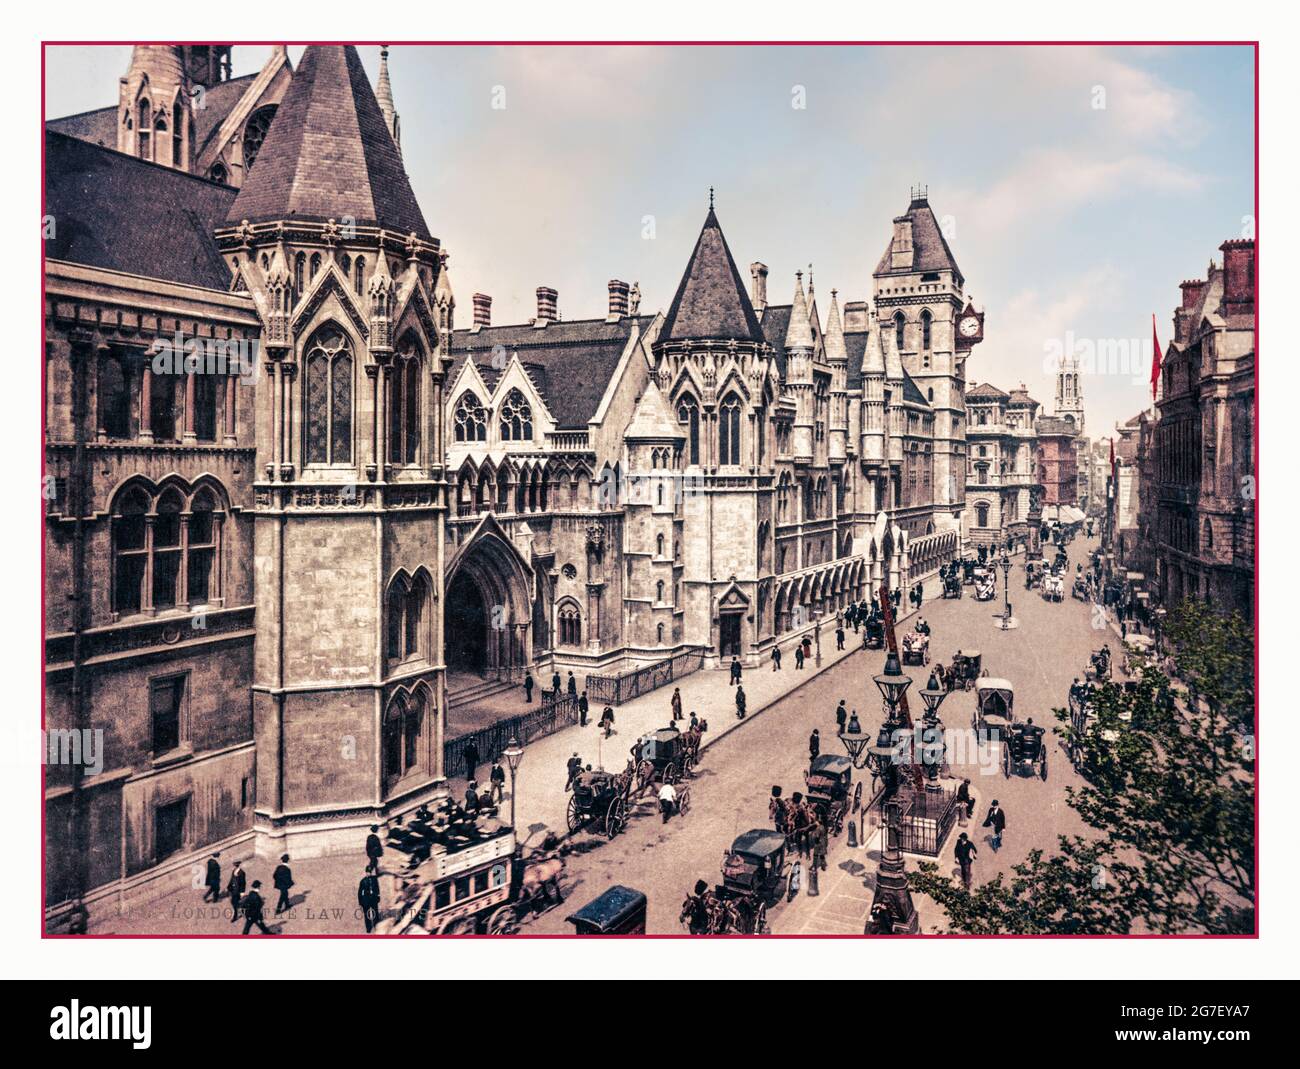 LAW COURTS HOLBORN LONDON Vintage historic 1890's photochrom of Royal Courts of Justice Holborn London. with horse drawn bus and carriages The Law Courts [London] ; : [The Photochrom Co., Ltd.], [ca. 1890-1906]: color photochrom ; Stock Photo